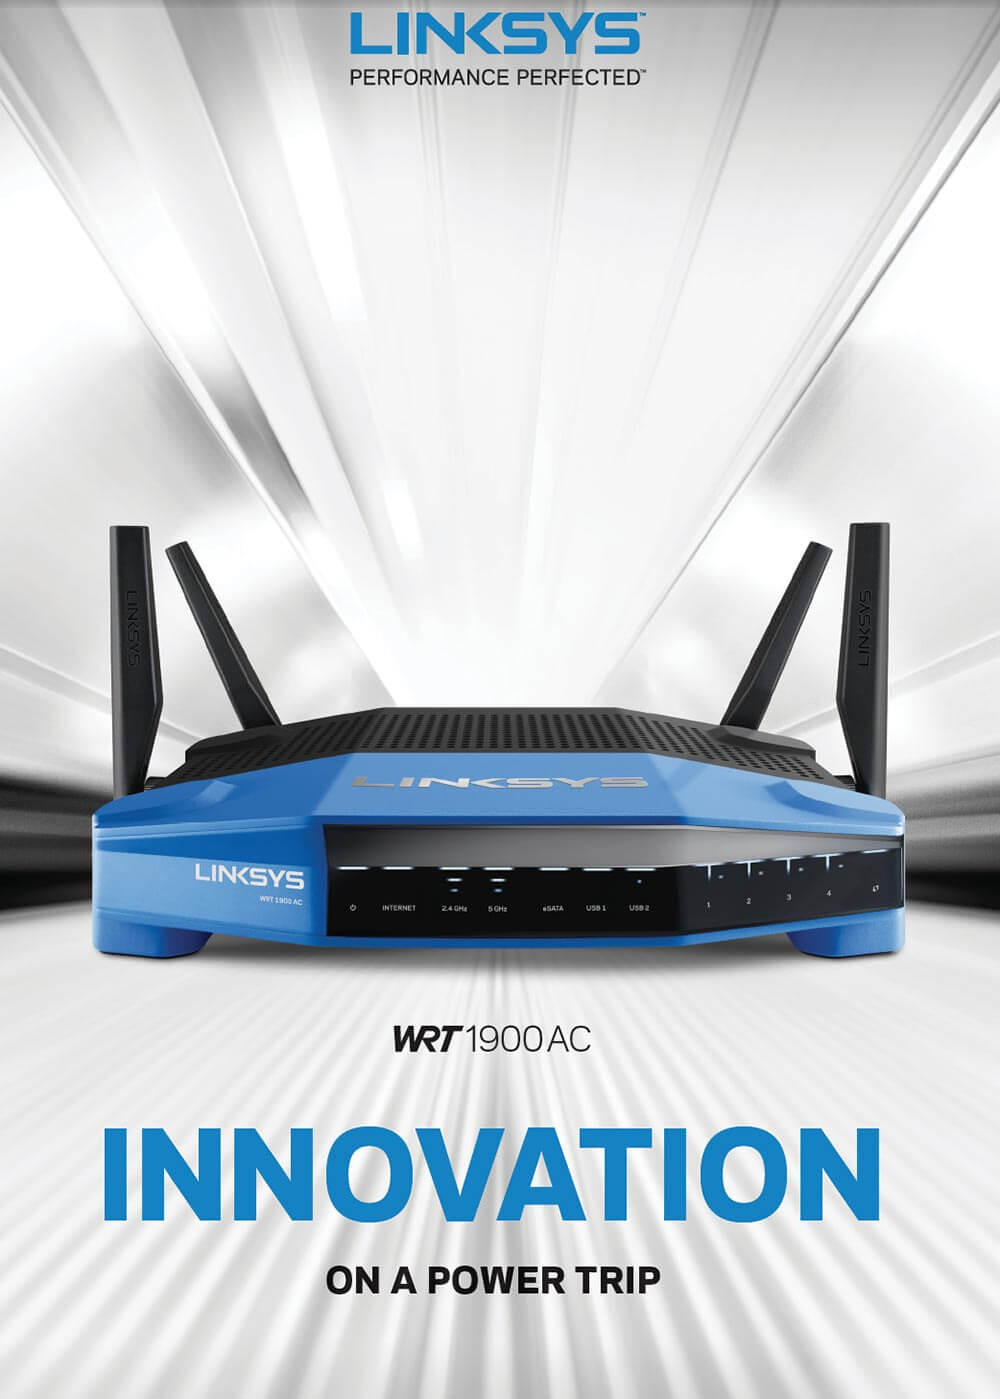 Linksys Promotional Image with Word "Innovation"